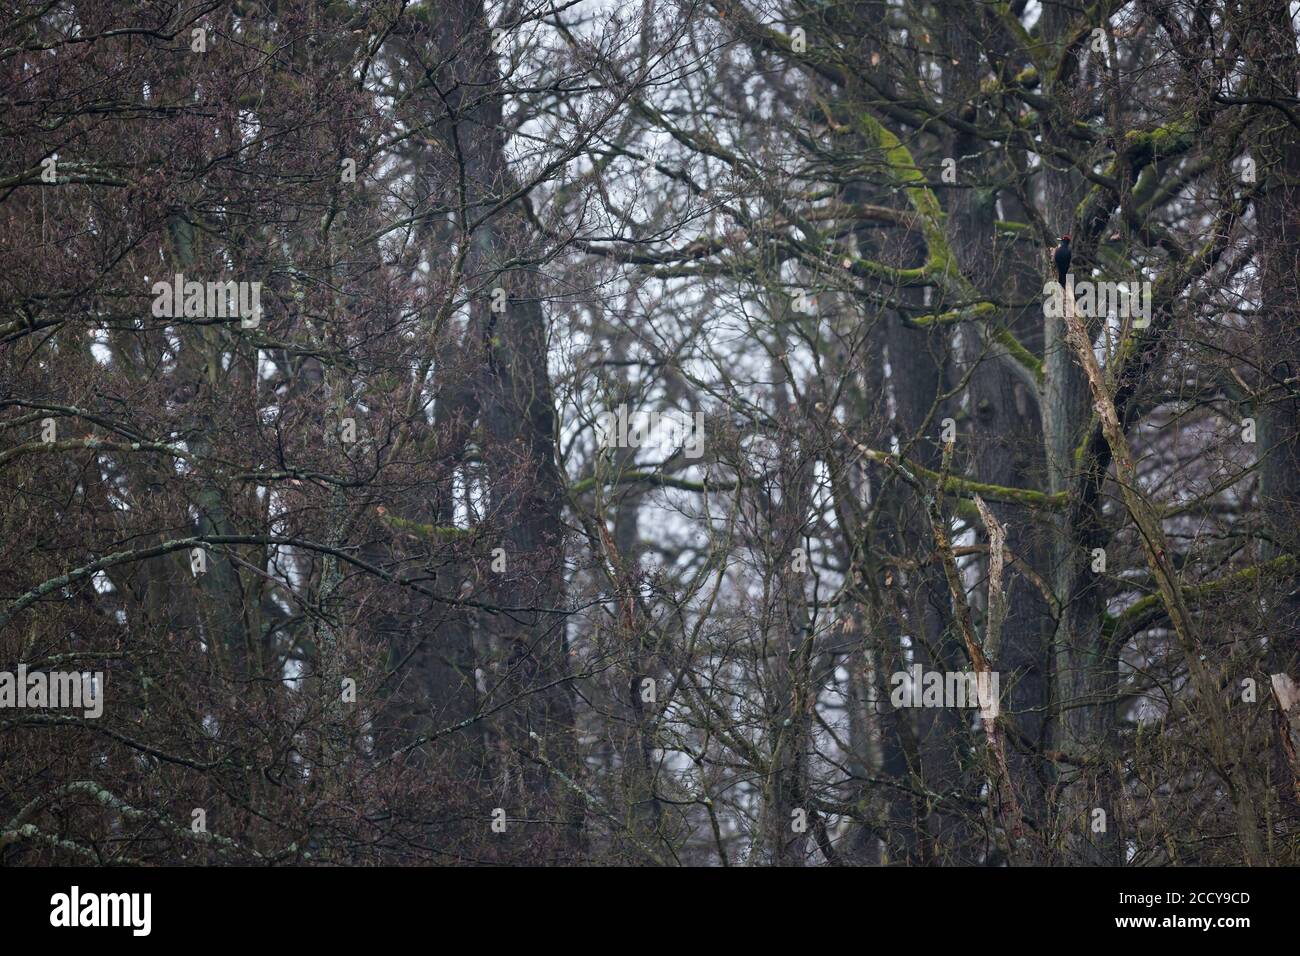 Black Woodpecker (Dryocopus martius martius), adult male chipping bark looking for food in forest in Germany. Stock Photo